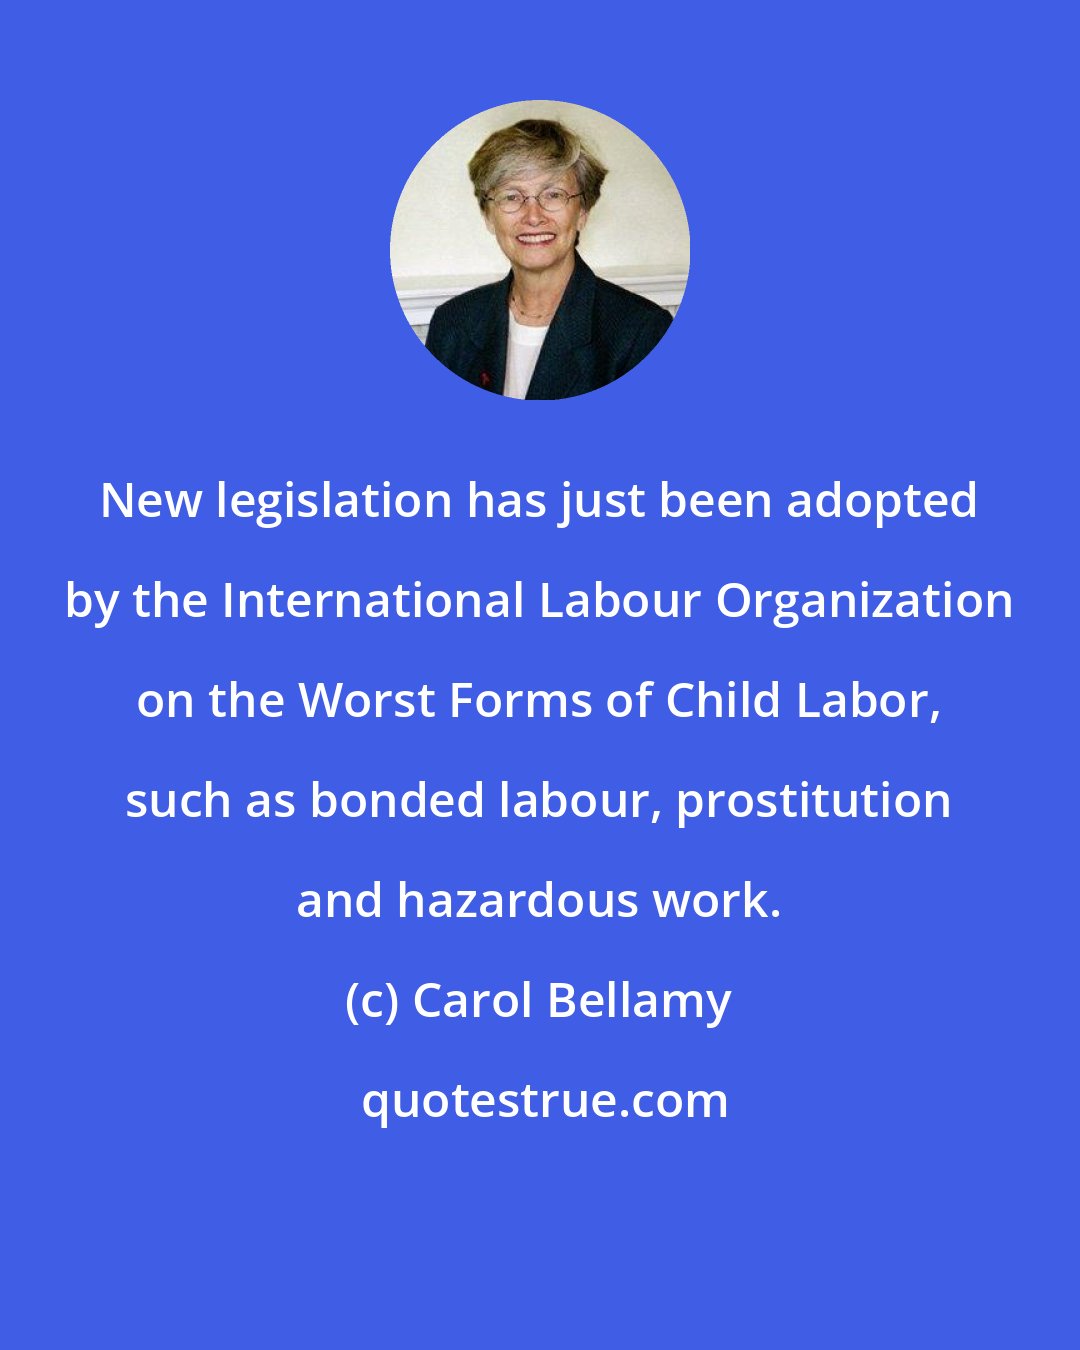 Carol Bellamy: New legislation has just been adopted by the International Labour Organization on the Worst Forms of Child Labor, such as bonded labour, prostitution and hazardous work.